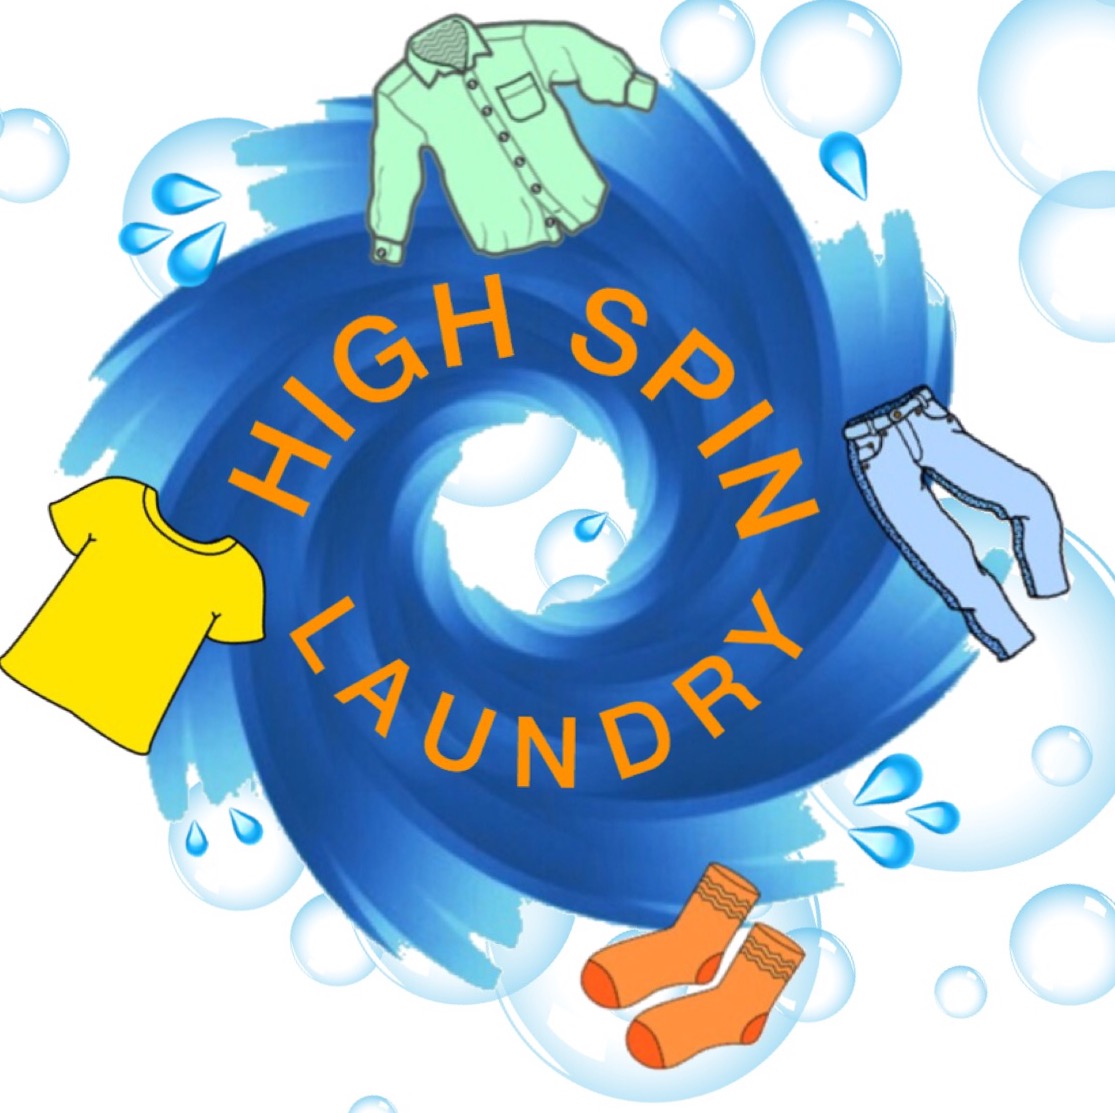 High Spin Laundry, Charlotte, NC